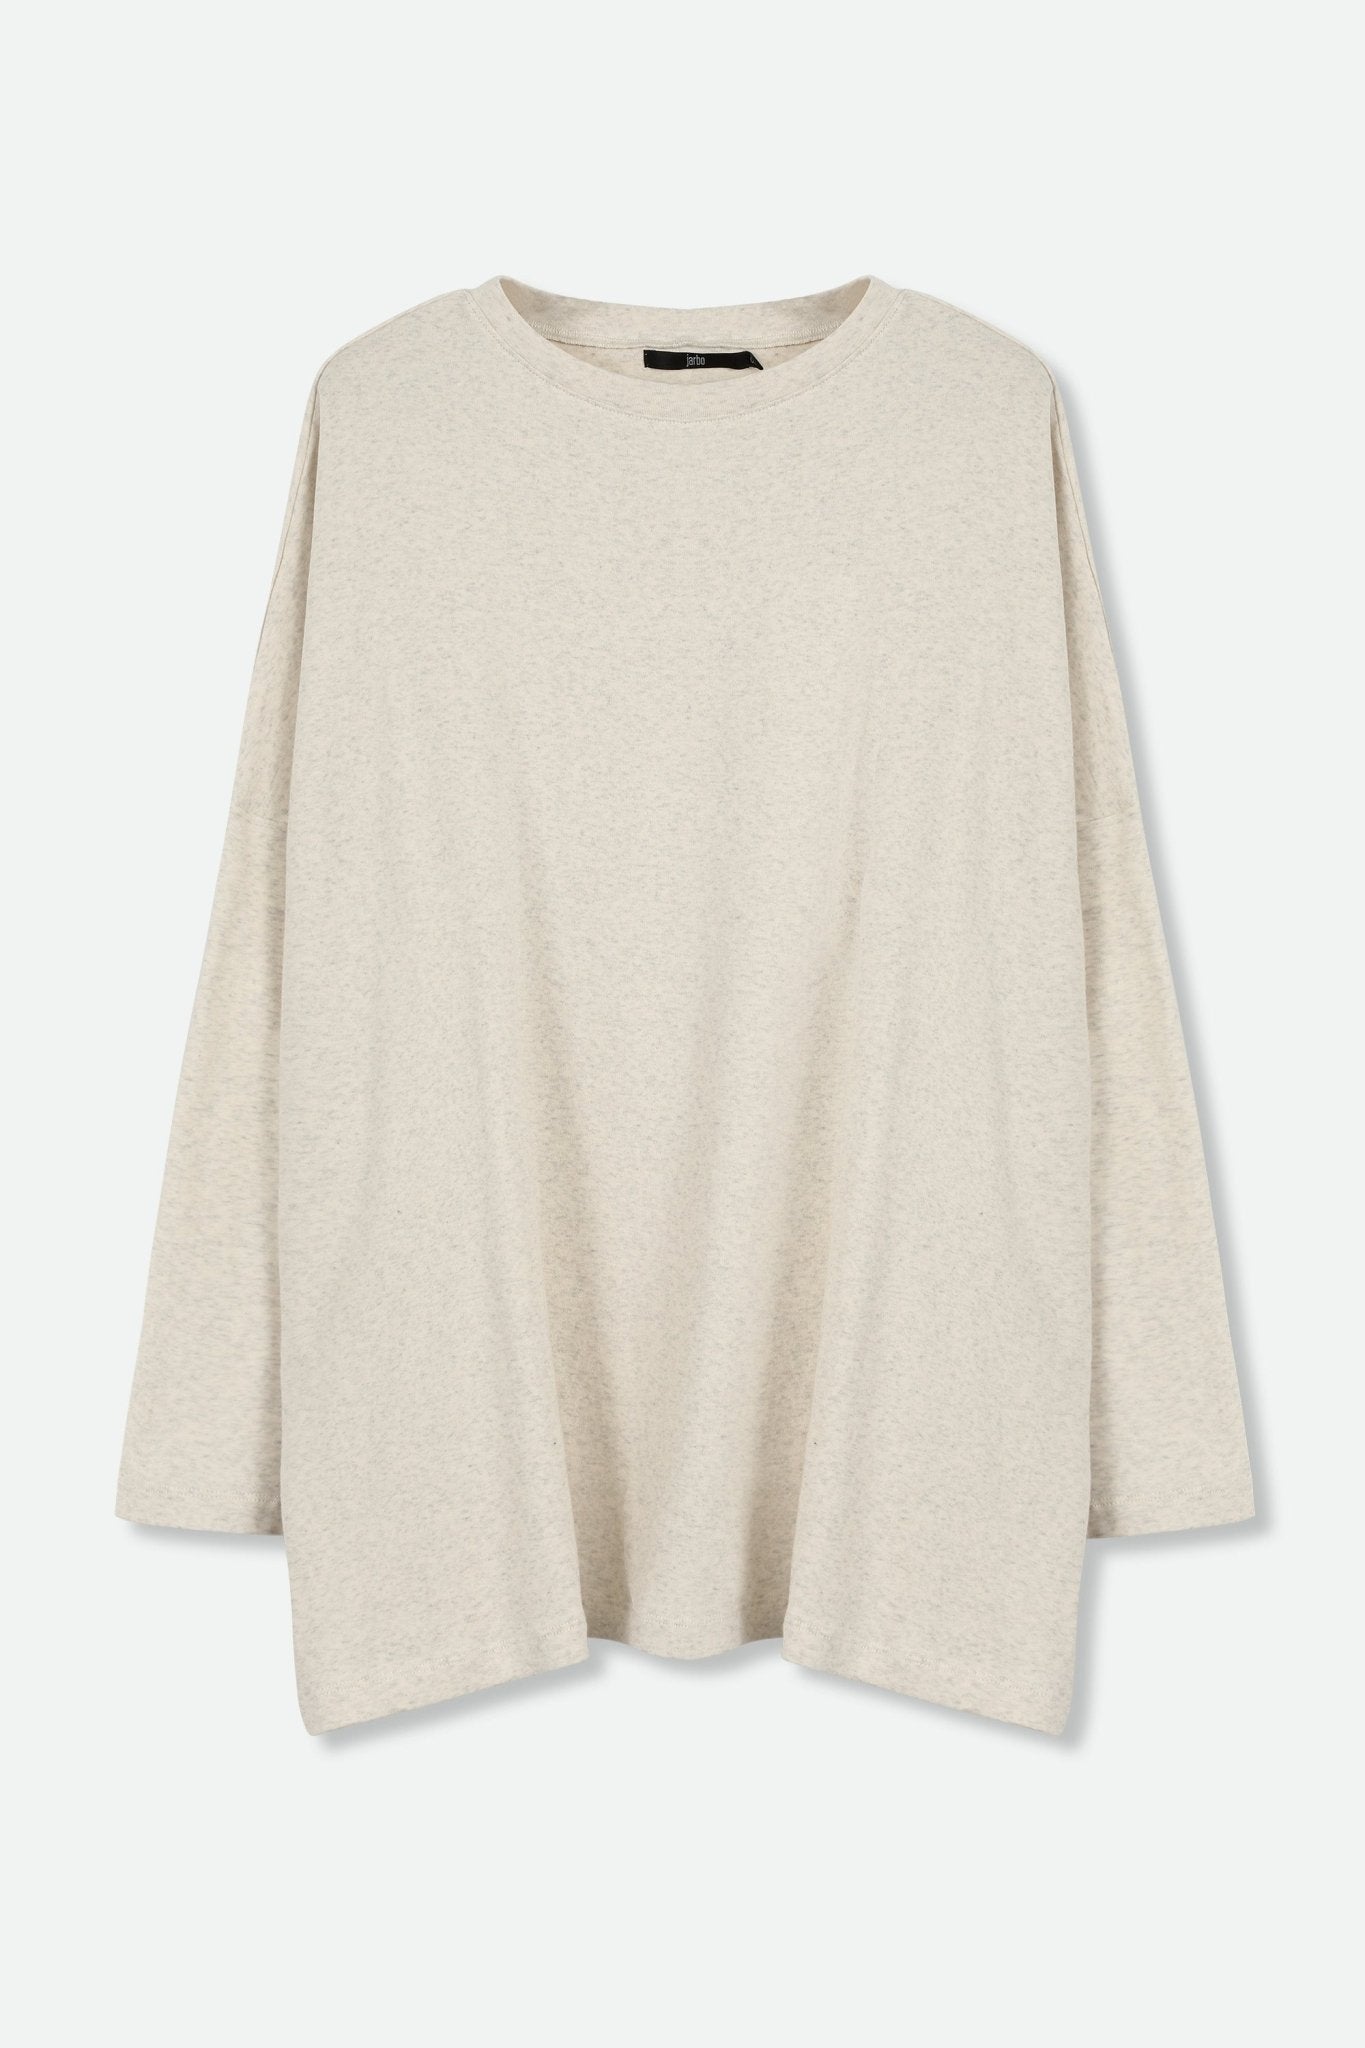 BOYFRIEND RELAXED-FIT LONG SLEEVE CREW IN HEATHER PIMA COTTON STRETCH